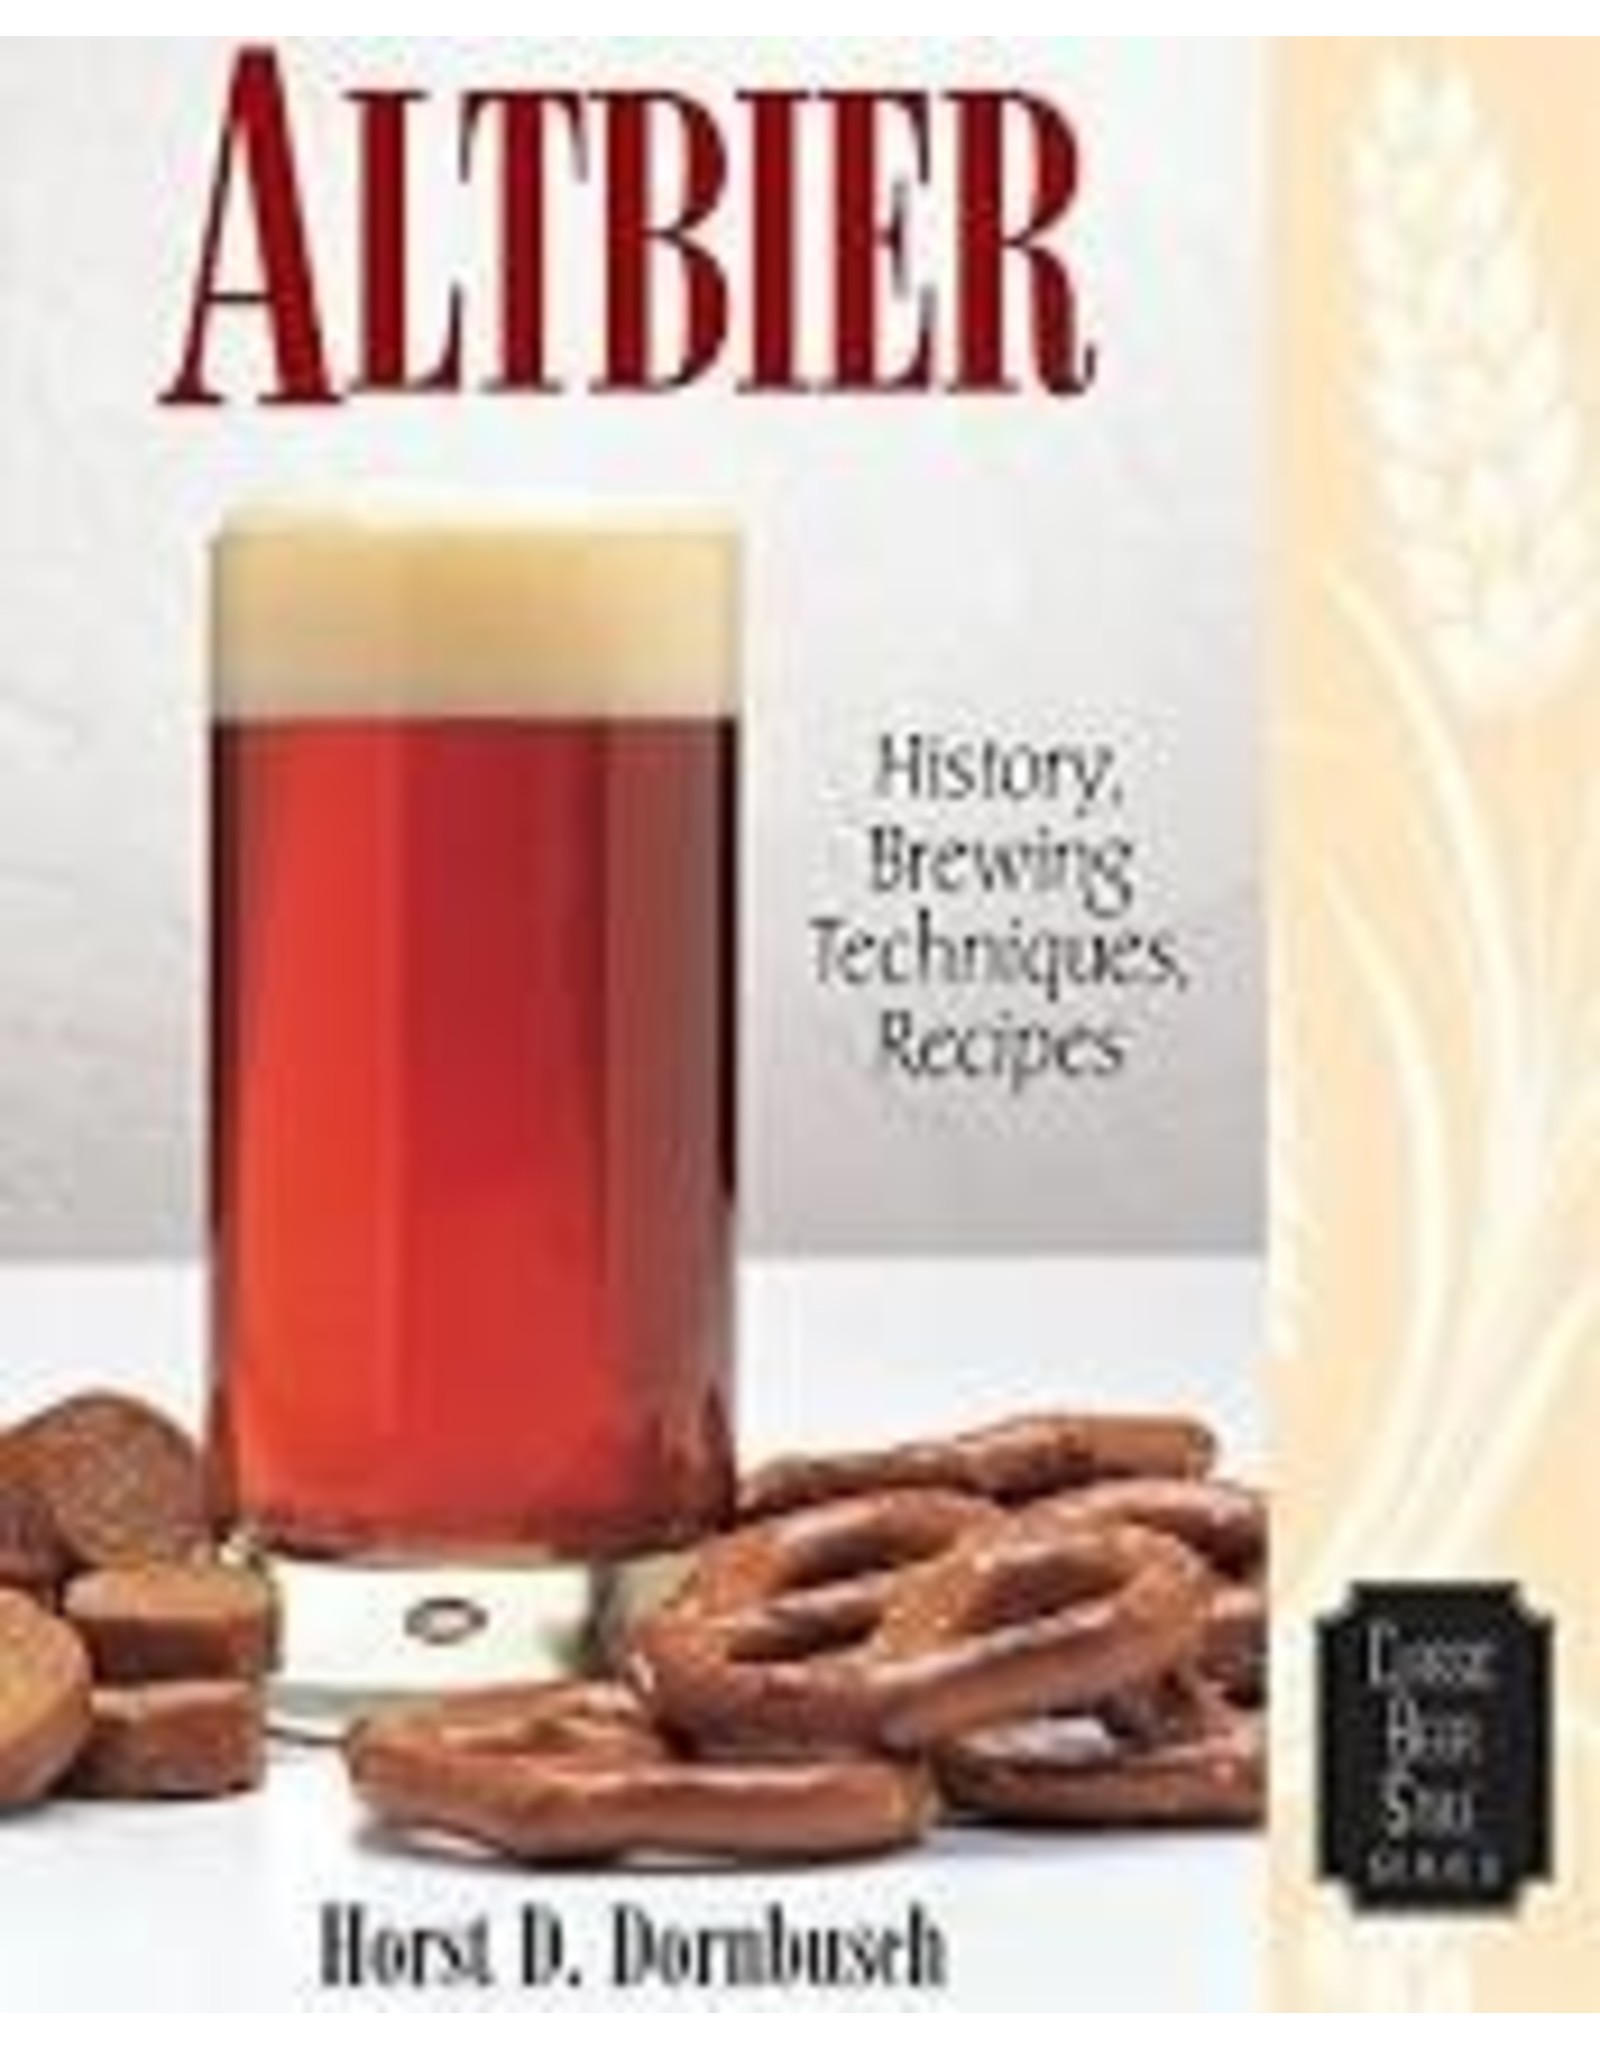 Altbier; Classic Beer Styles Series #12  (book)